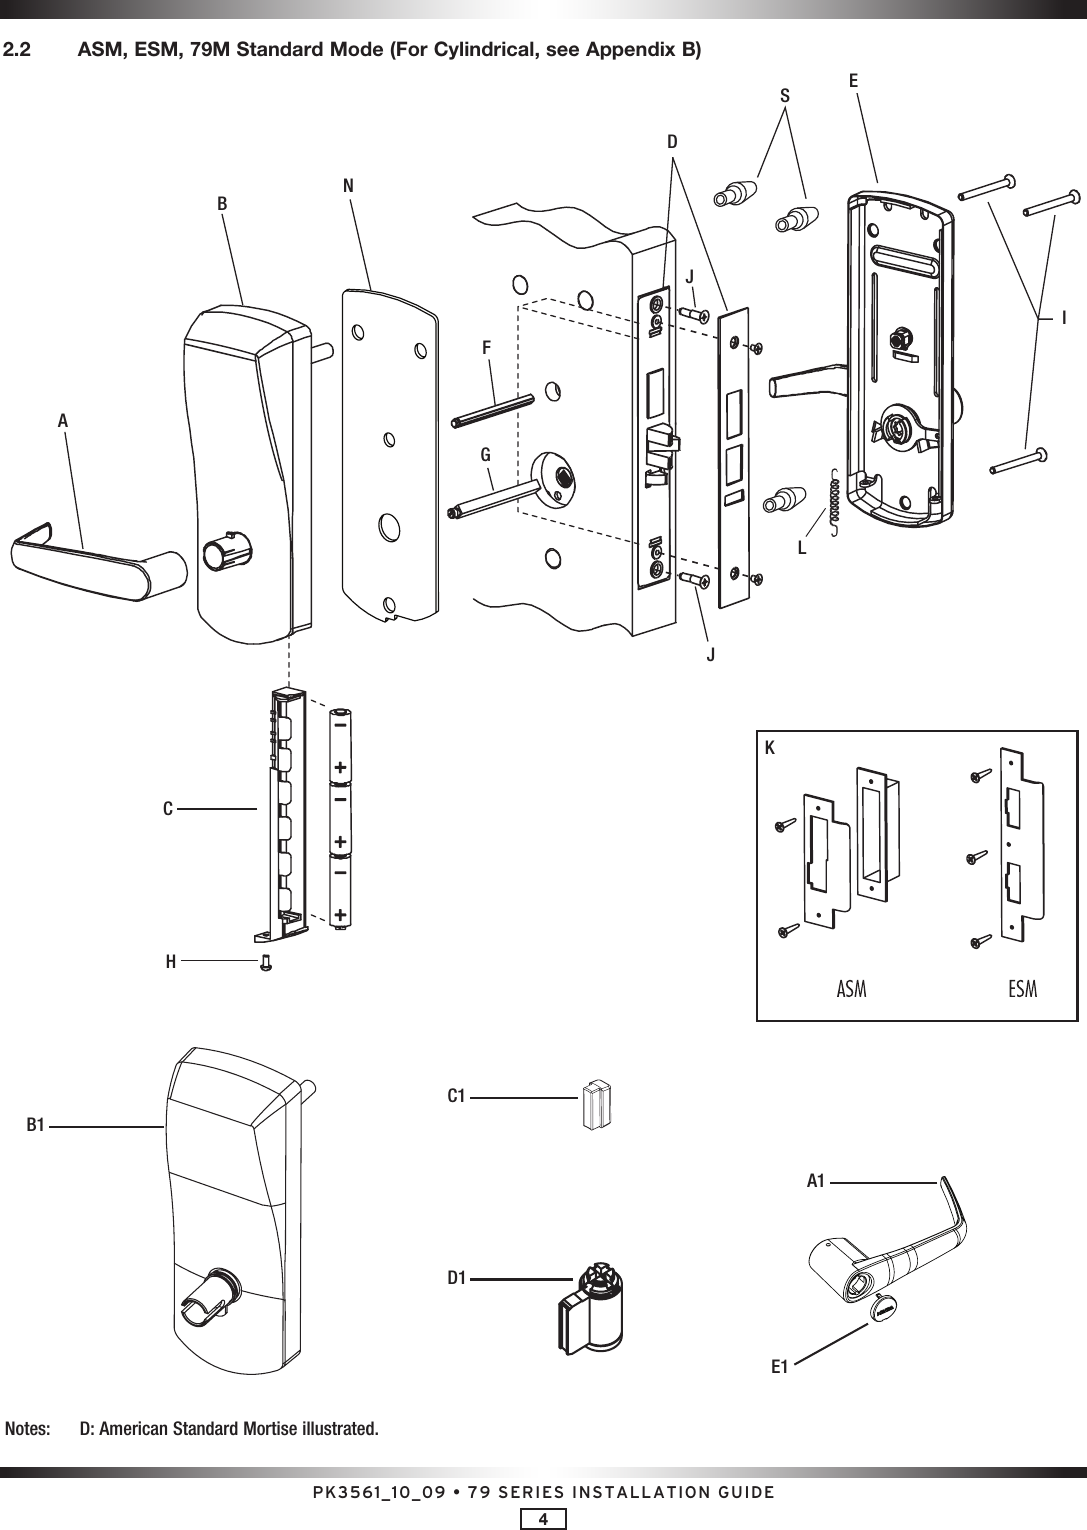 PK3561_10_09 • 79 SERIES INSTALLATION GUIDE4Notes:  D: American Standard Mortise illustrated.ACHBNFDSGJJLIEKB1D1C1A1E12.2    ASM, ESM, 79M Standard Mode (For Cylindrical, see Appendix B)